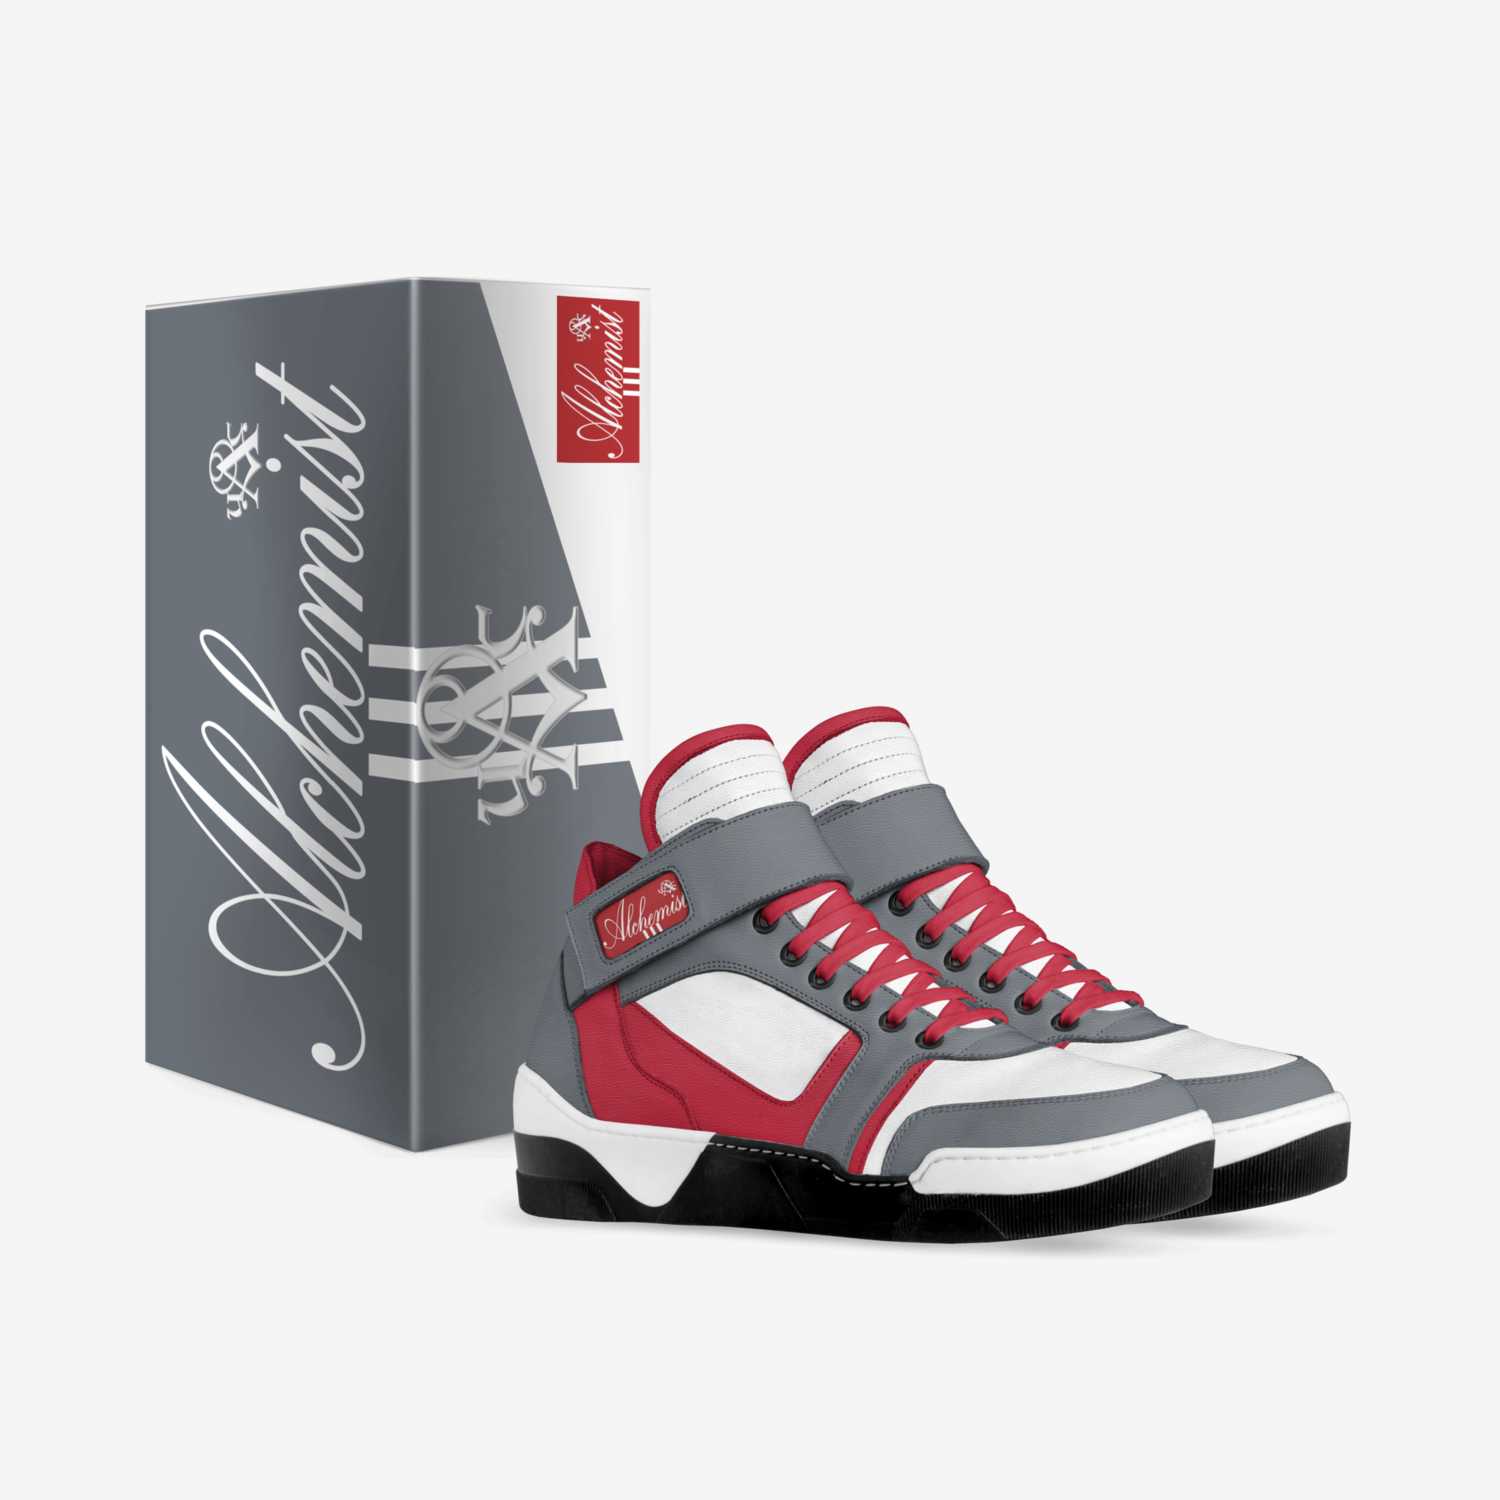 APIDTA 2 custom made in Italy shoes by Urban Alchemist Clothing | Box view